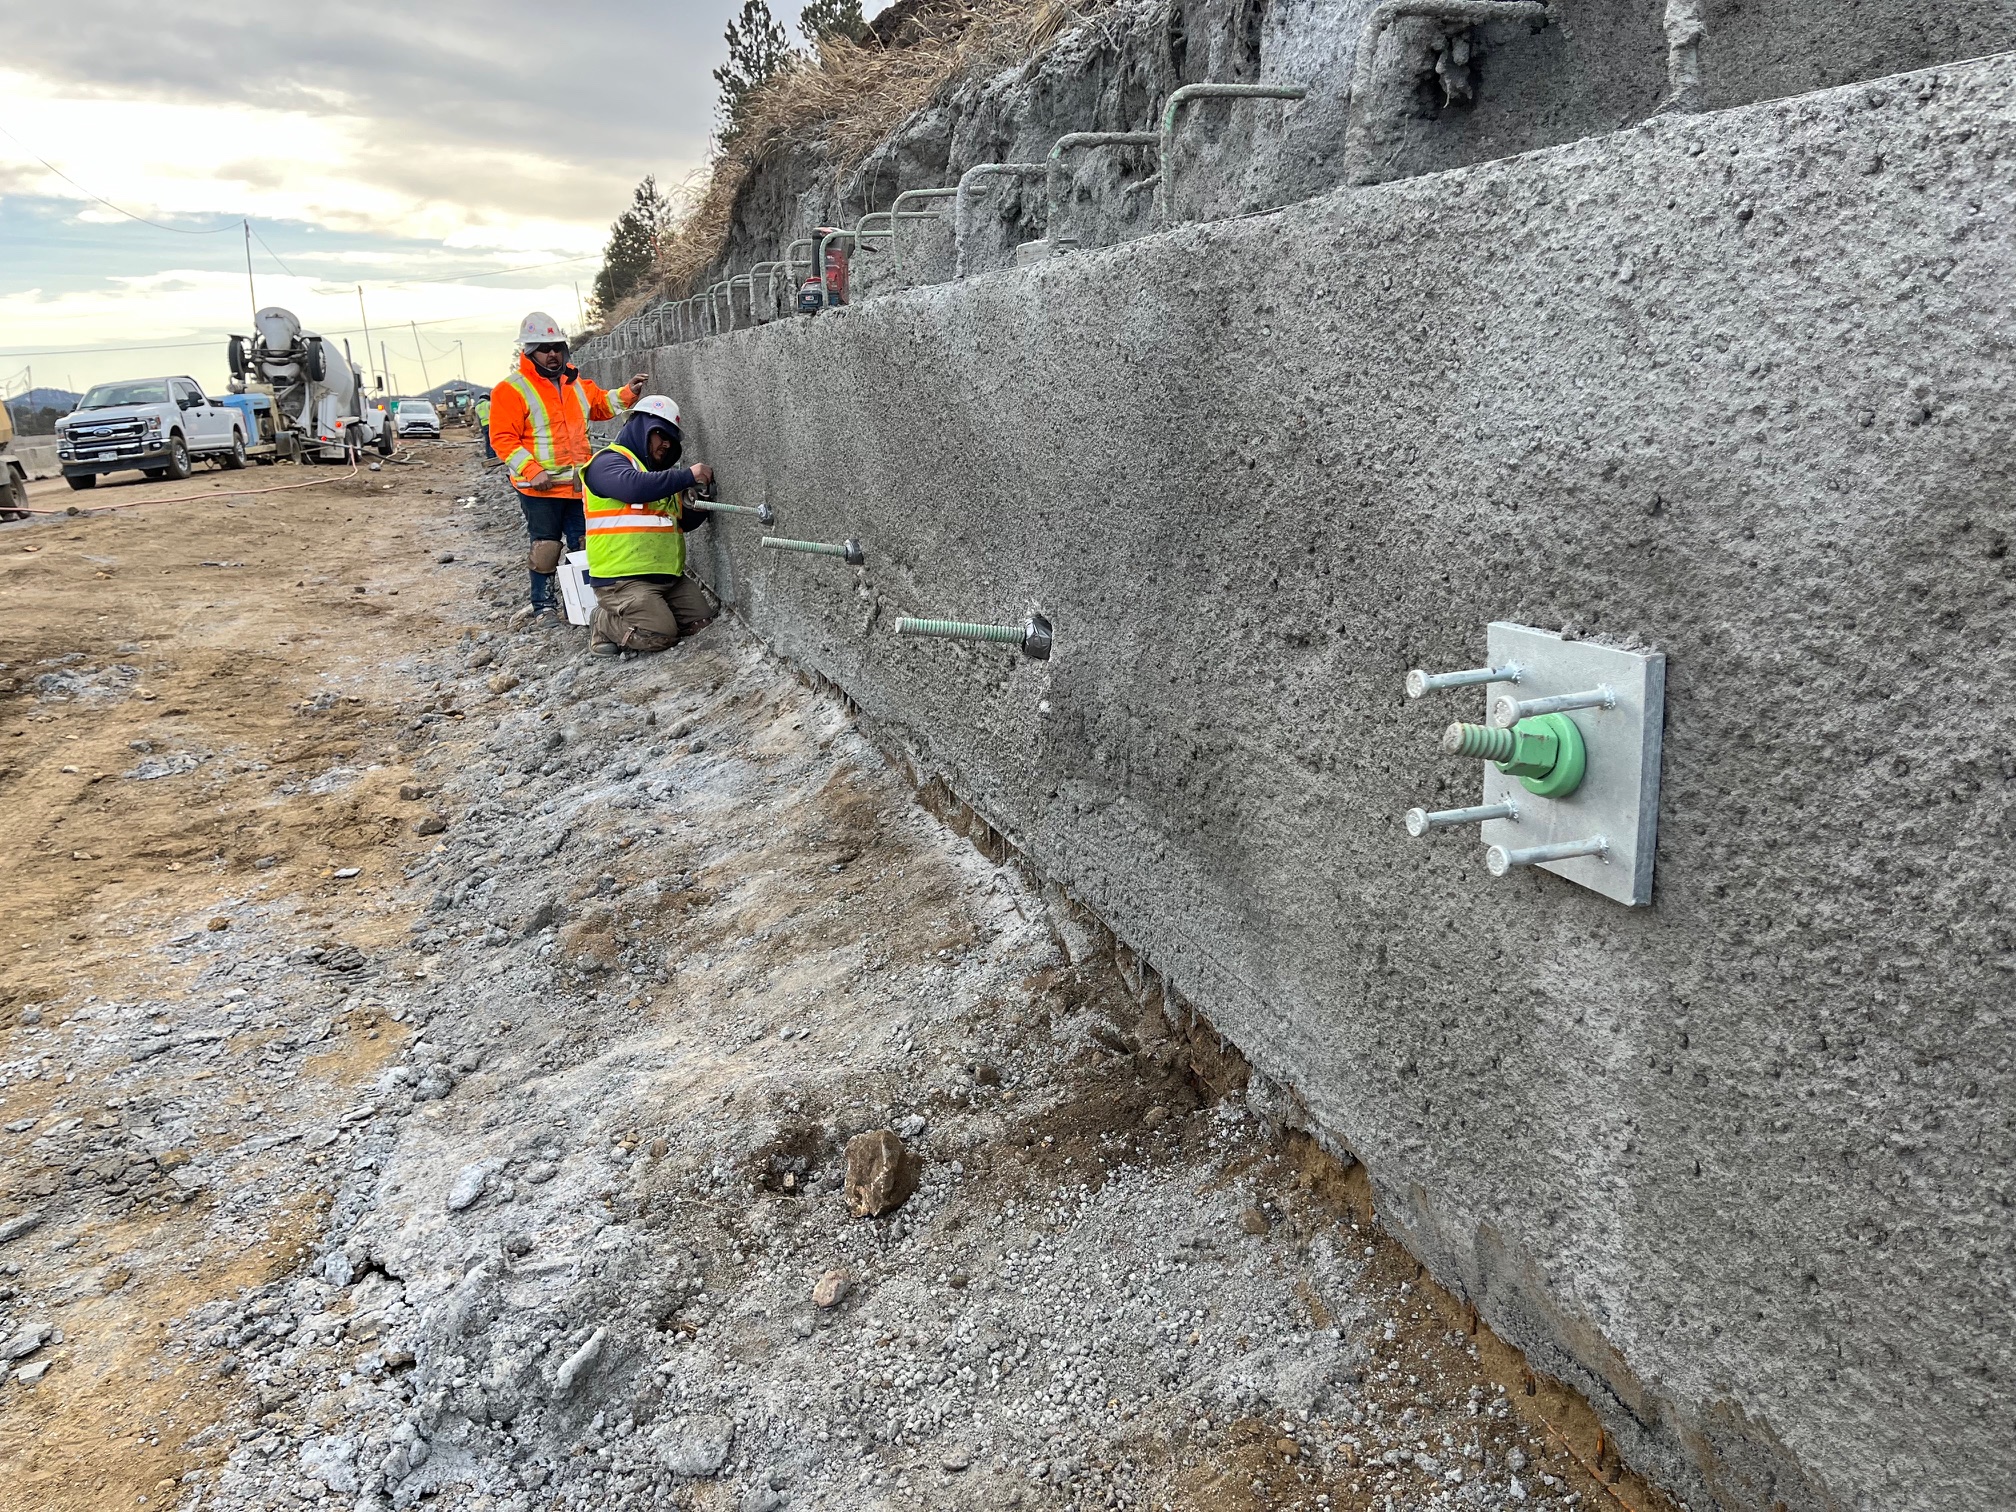 240321_Kraemer crew installing new Double Erosion Protection Caps on the soil nails_I-70 Floyd Hill.jpg detail image